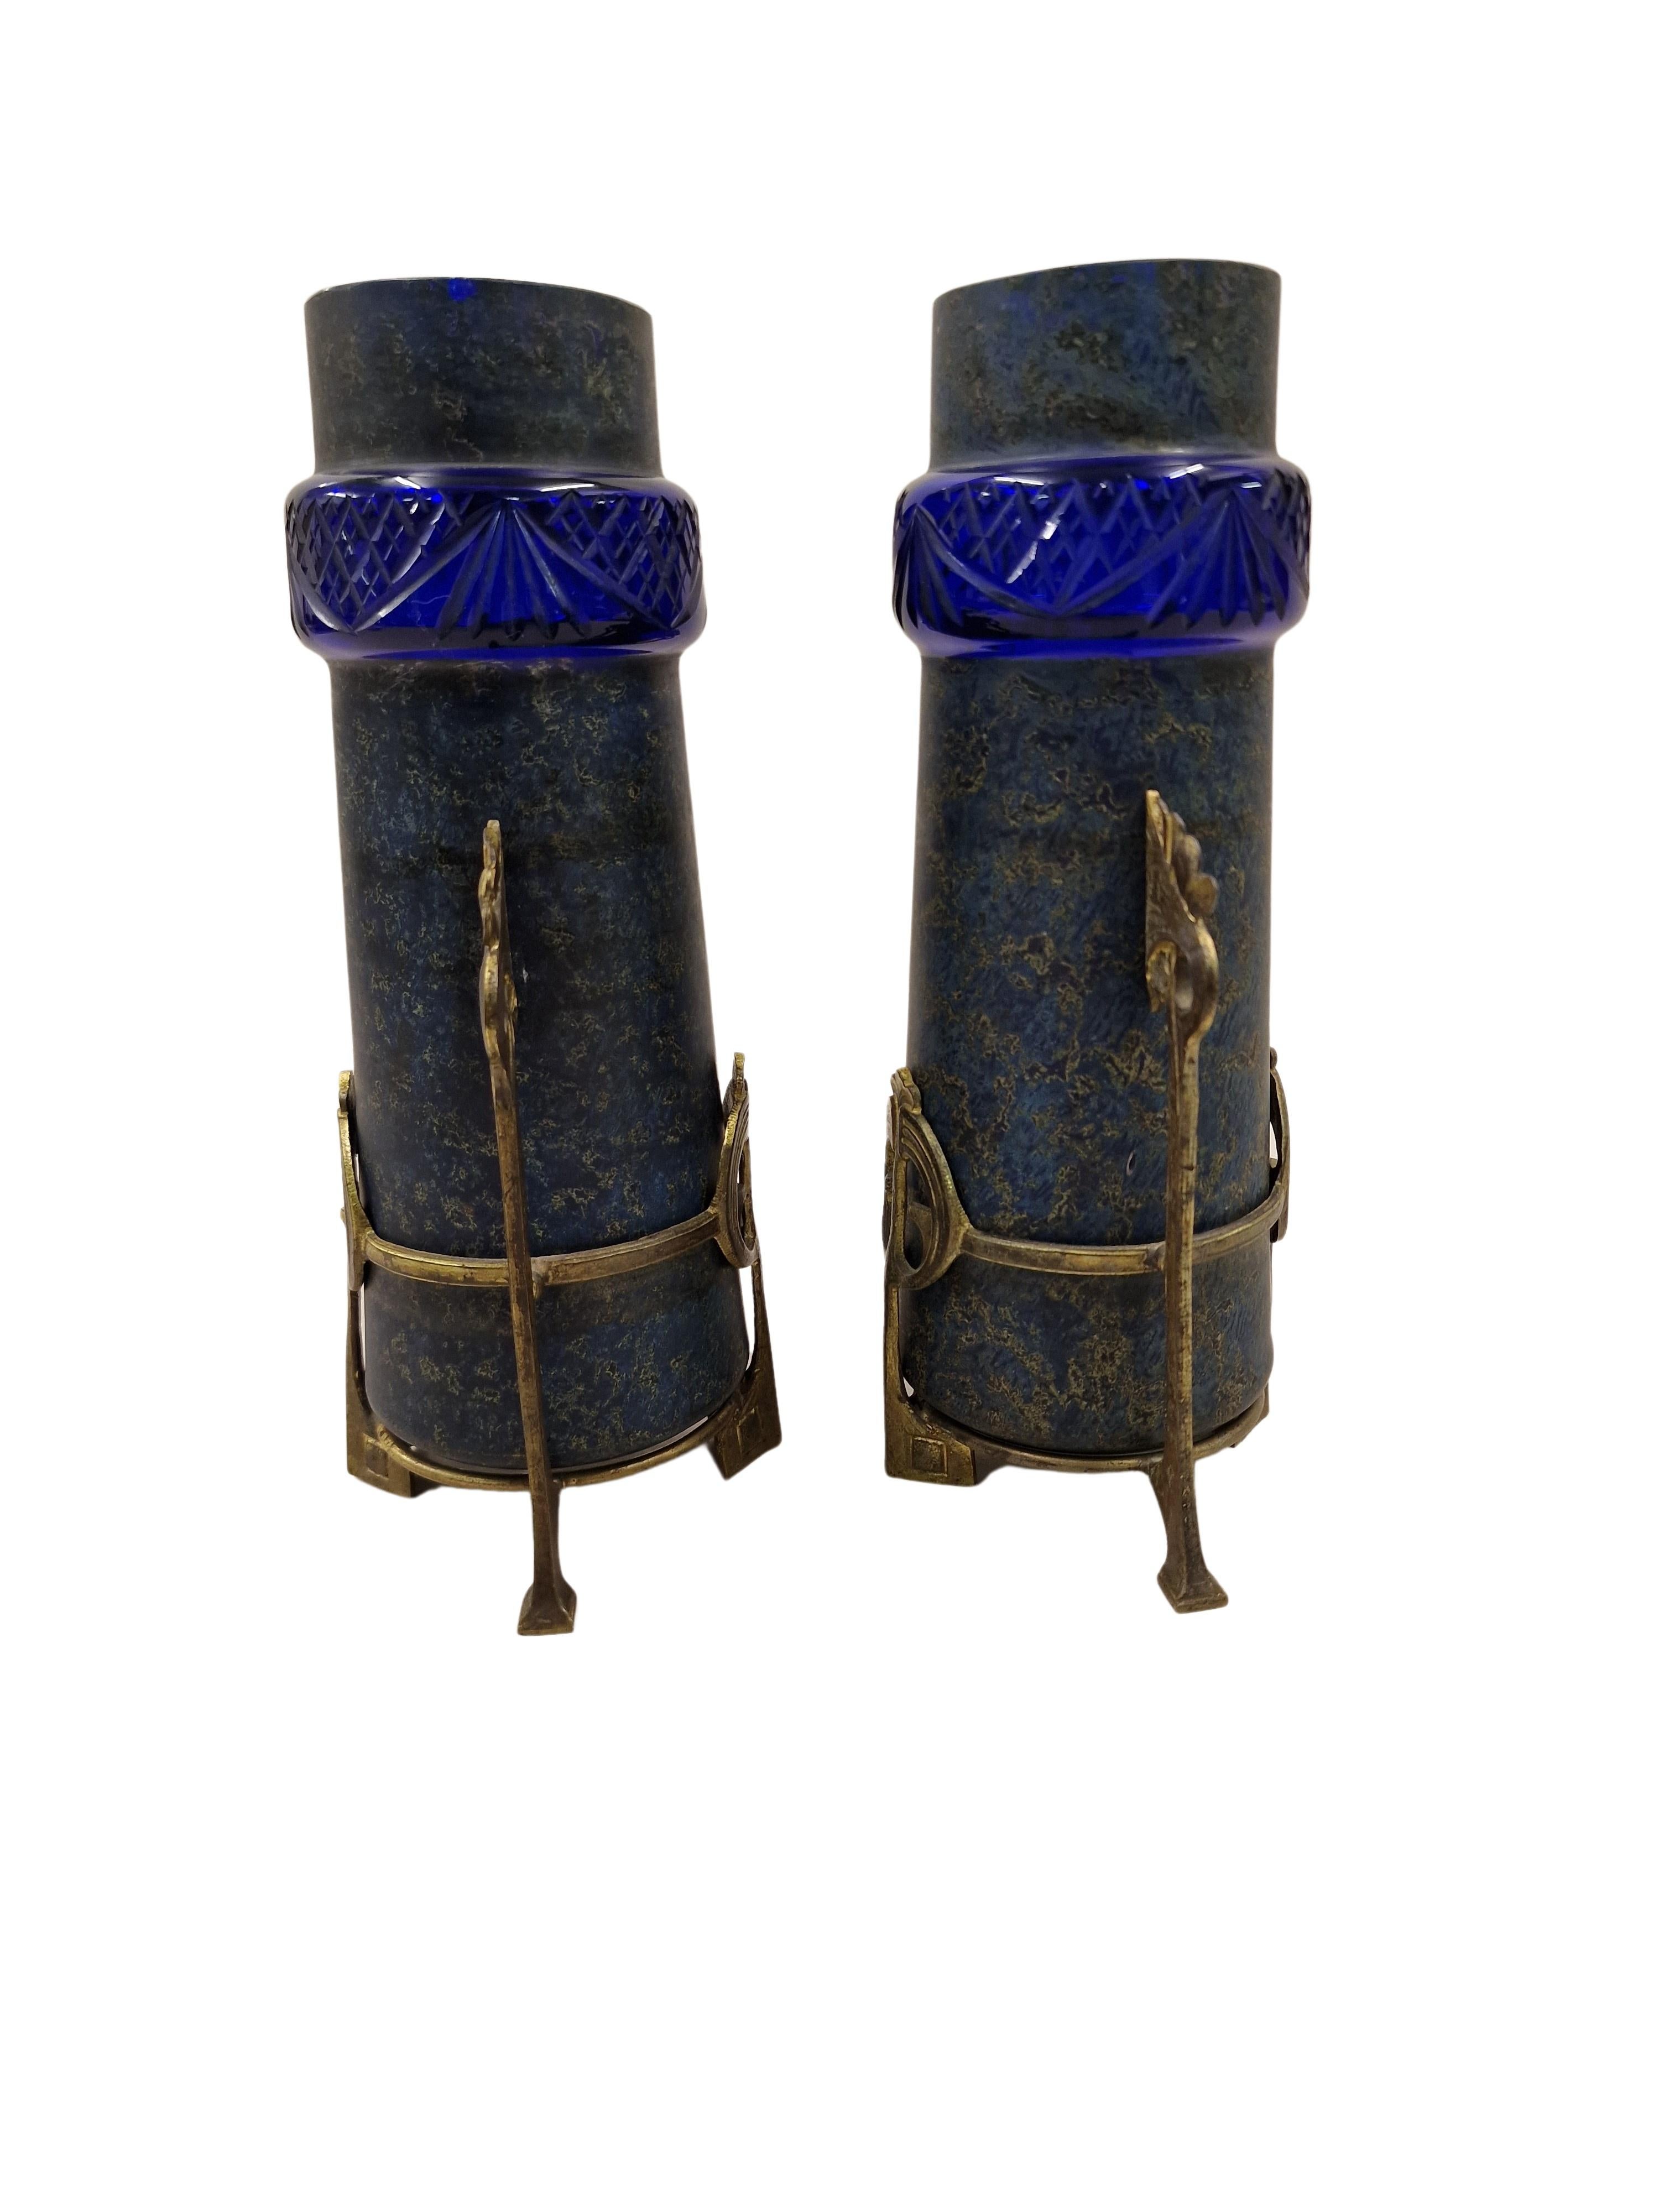 Two superb bronze mounted glass vases, around 1900. 

These excellent pieces are of high craftmenship, unfortunately they are not attributable, most likely Bohemian, possibly manufacture Lambert. 
The glass body is made in a special technique, a